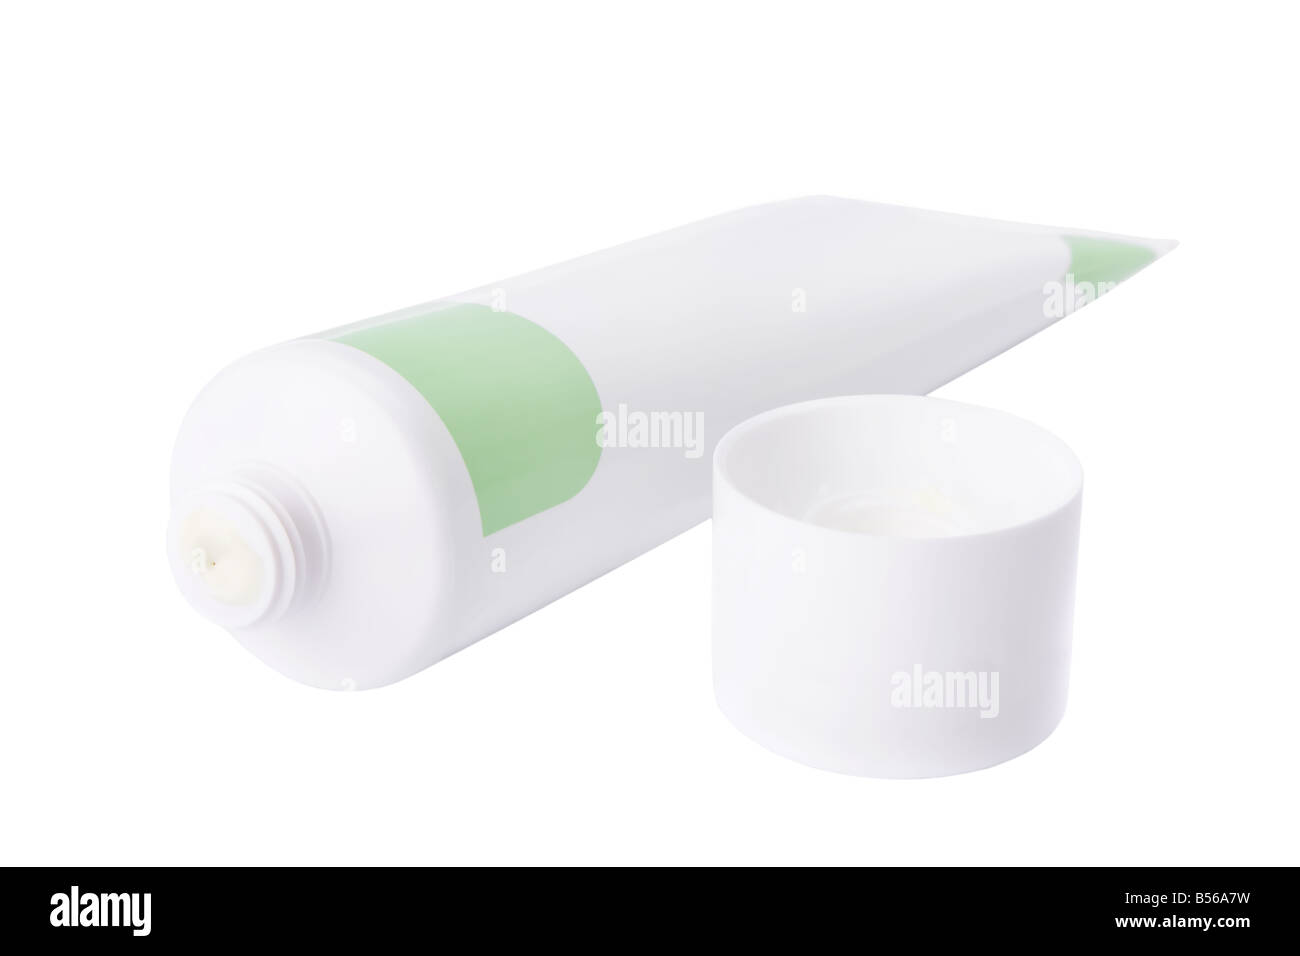 Ointment tube isolated on a white background Stock Photo